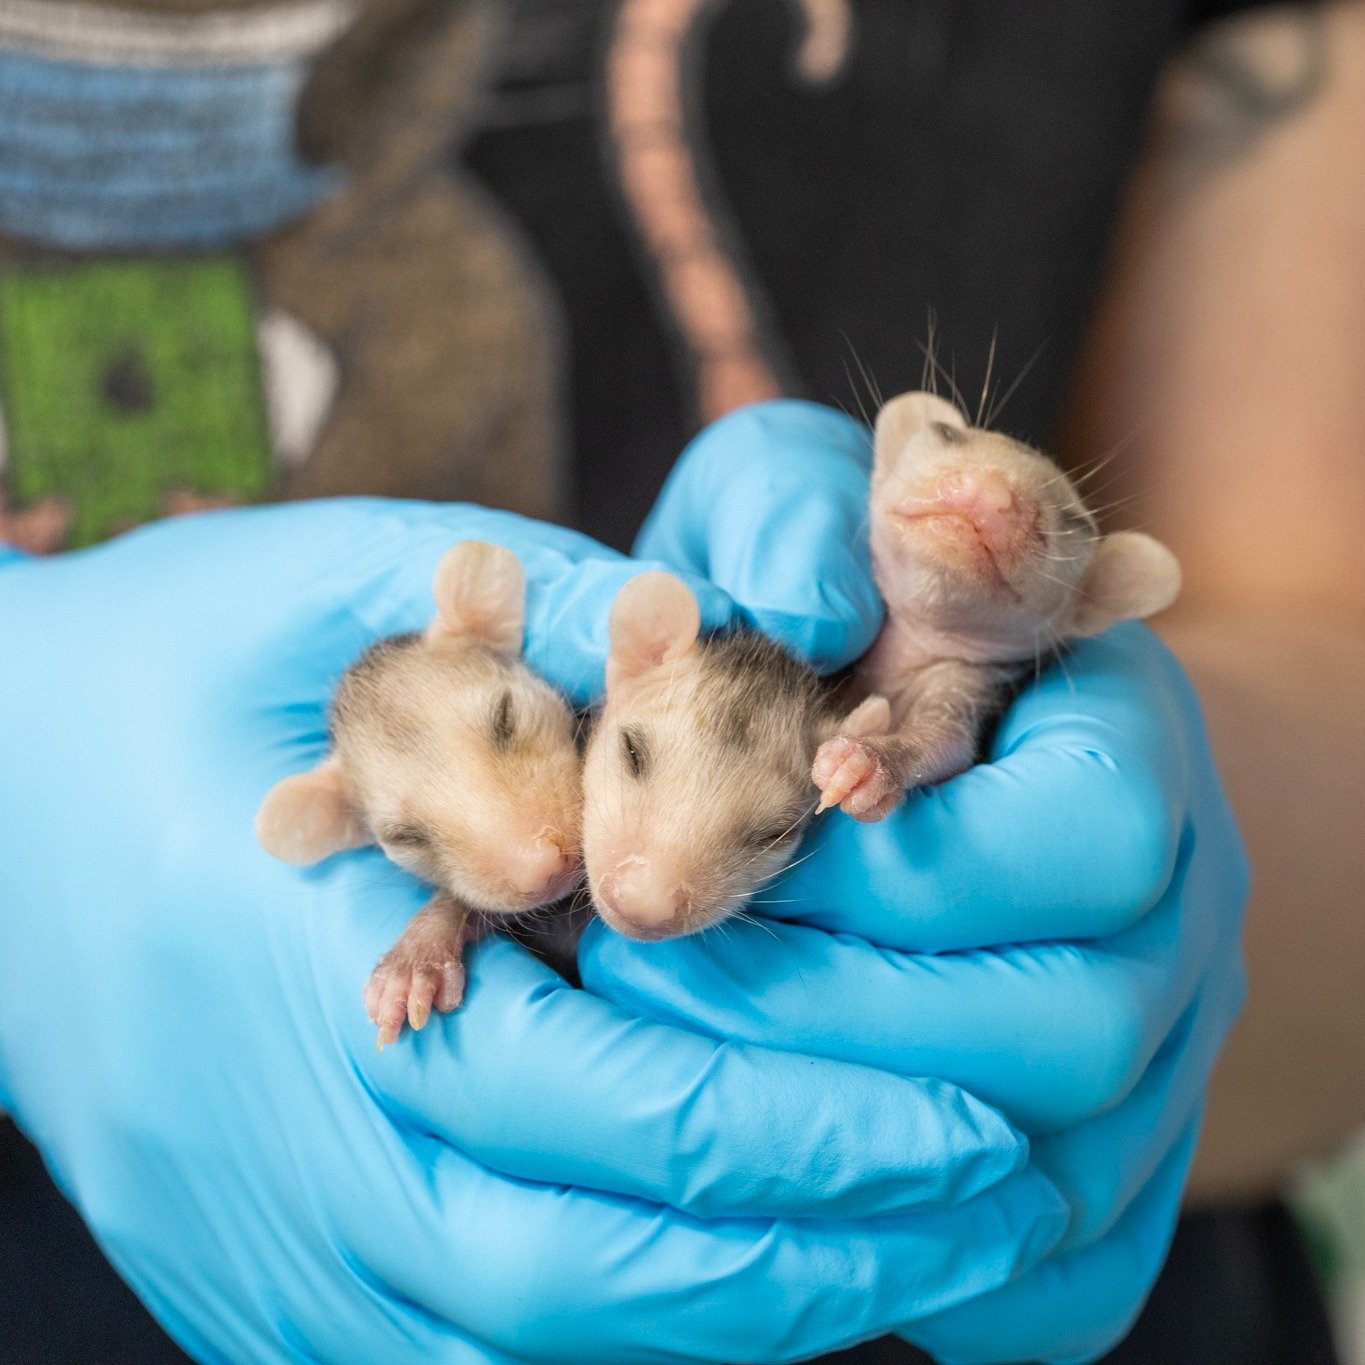 It's finally starting to feel like spring, which means it's time for our annual wildlife PSA! While our clinic provides care for injured wildlife during business hours, it's important to remember that not all wildlife needs rescuing. The National Wil